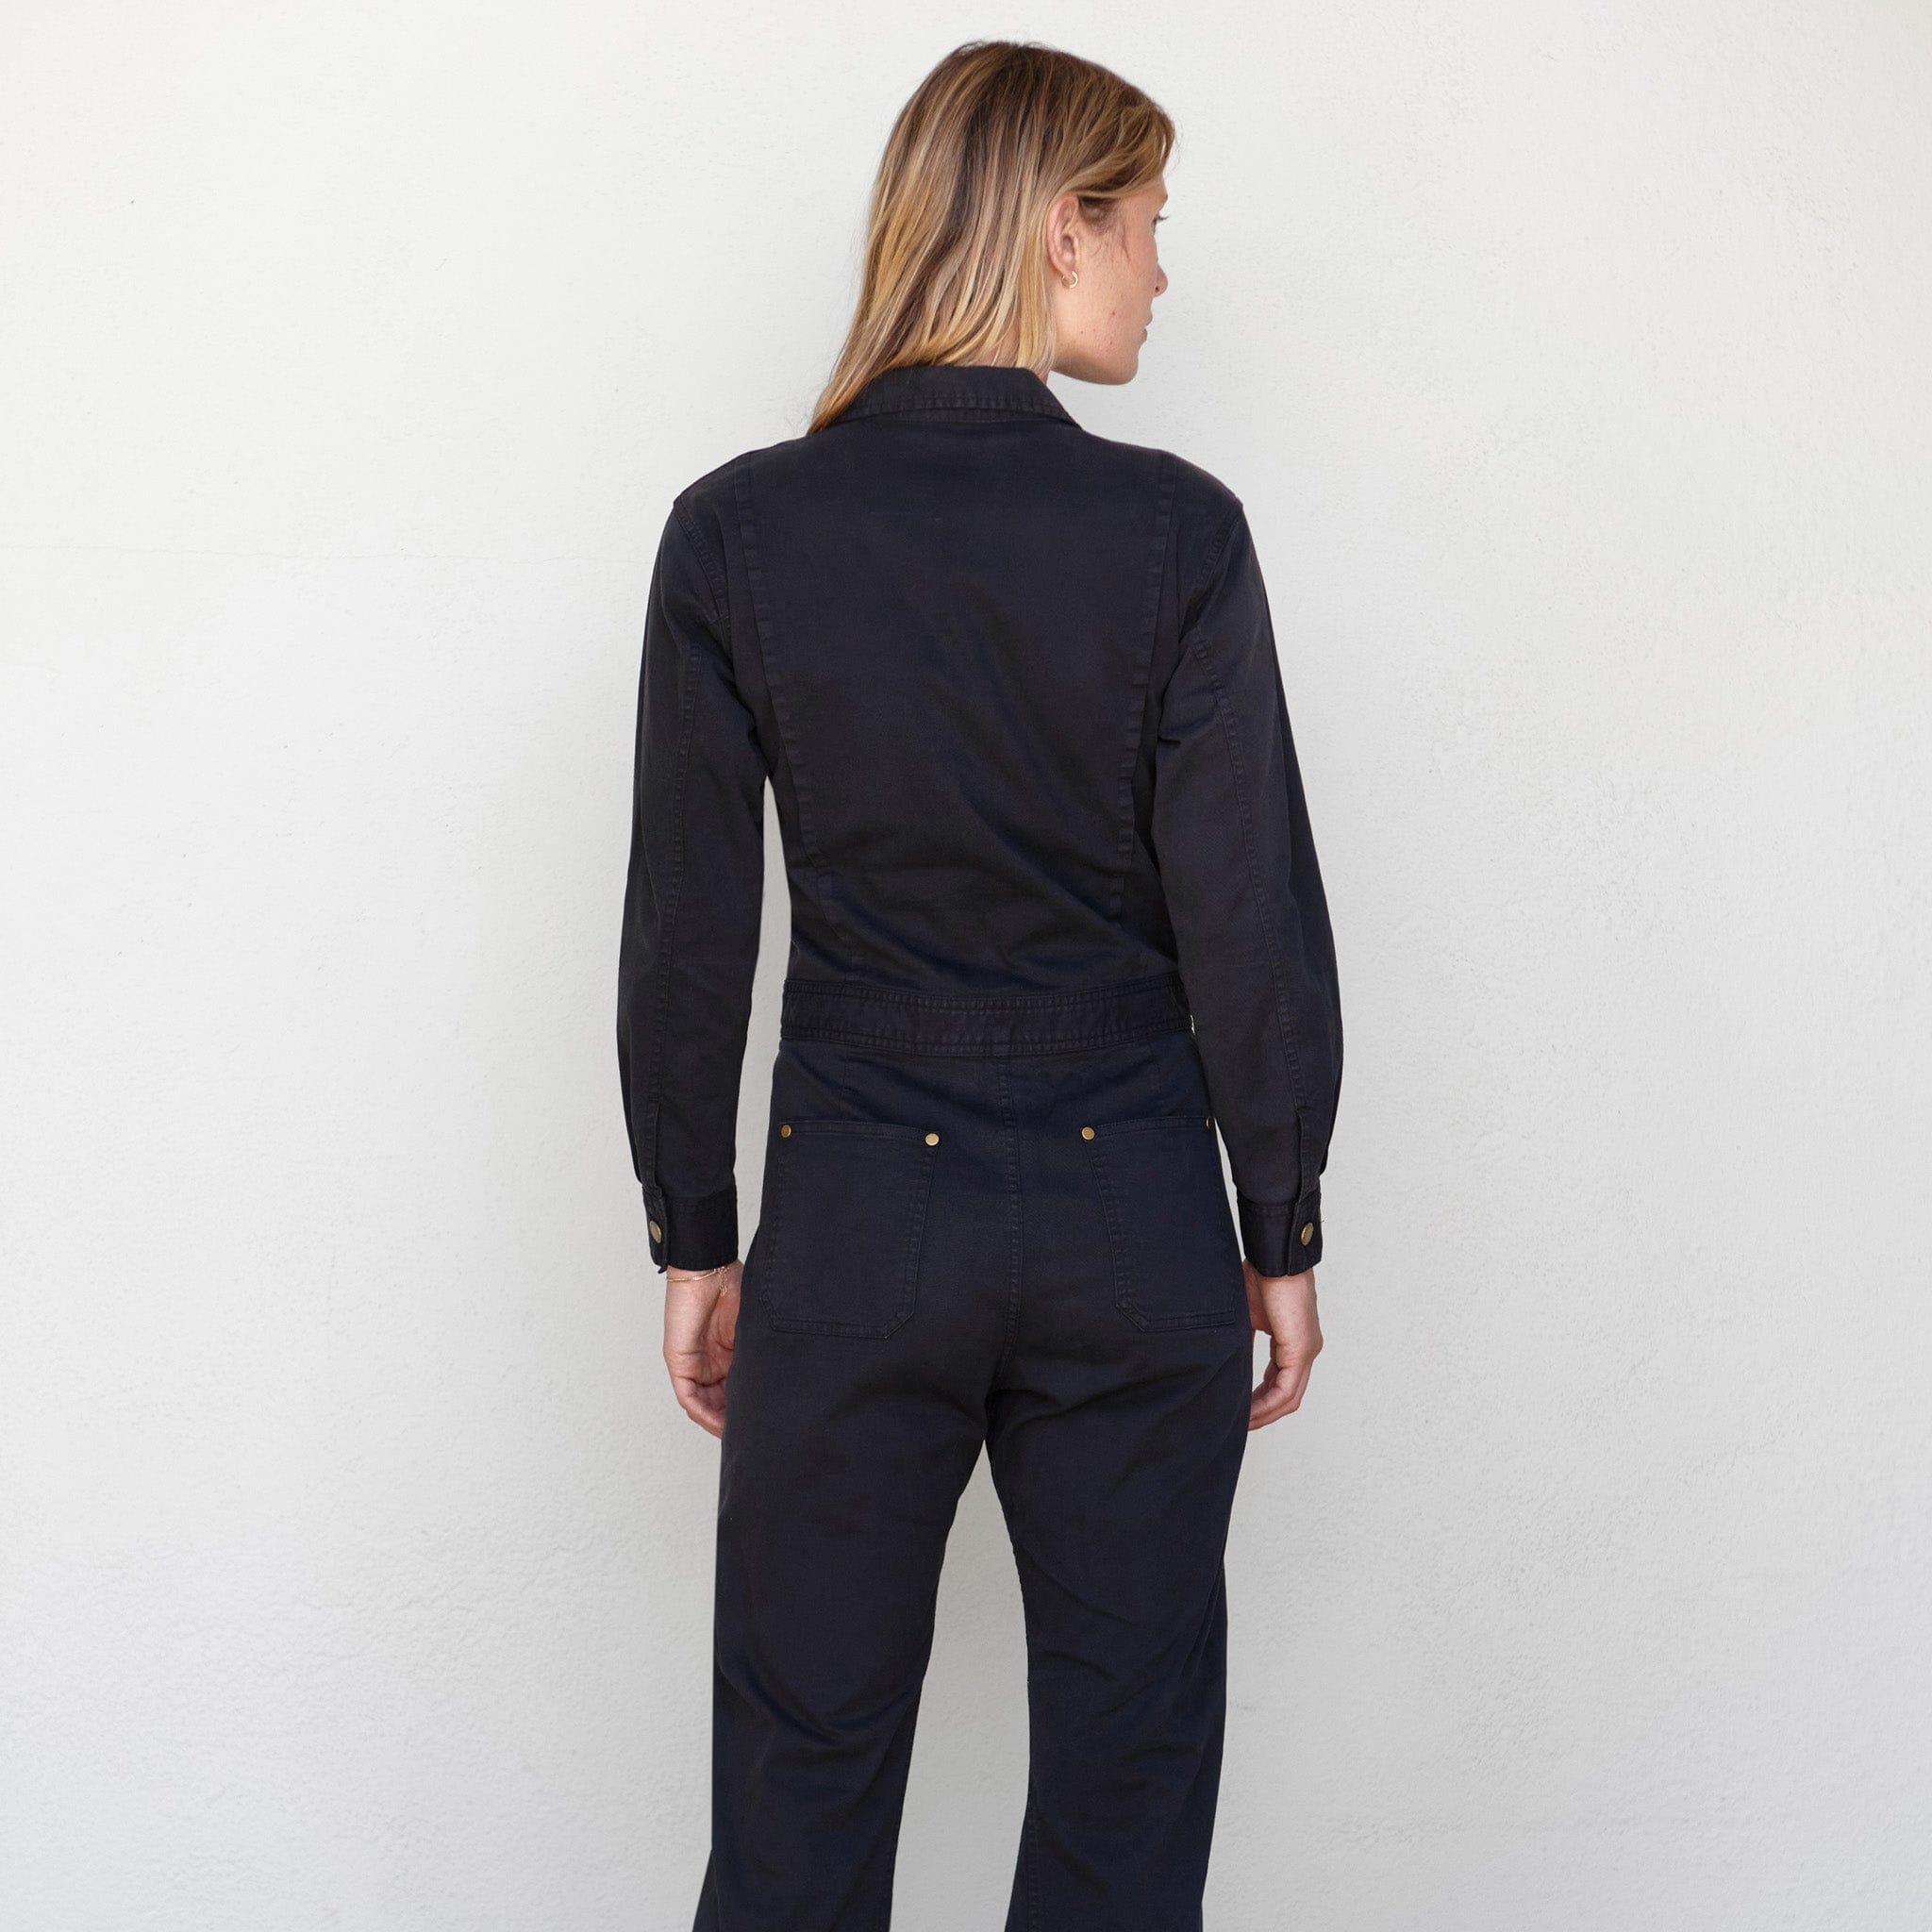 Only Jane Apparel Midnight / 4 The Only Jane Jumpsuit